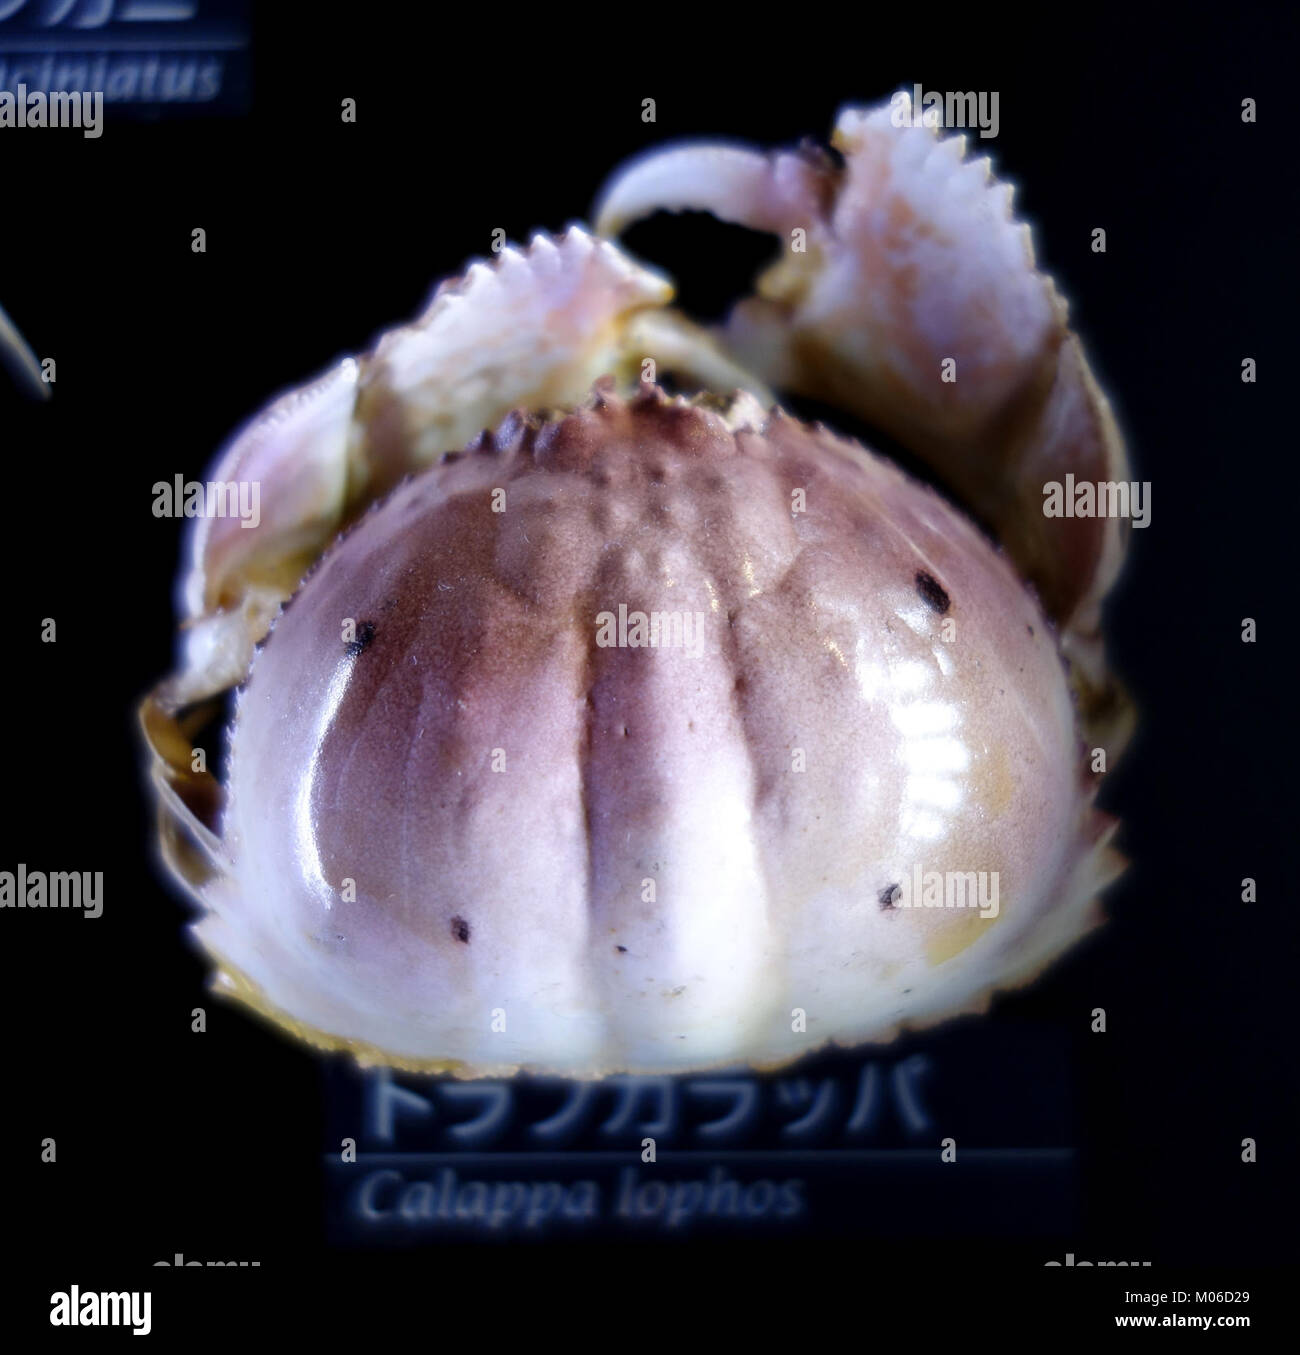 Calappa lophos - National Museum of Nature and Science, Tokyo - DSC06760 Stock Photo